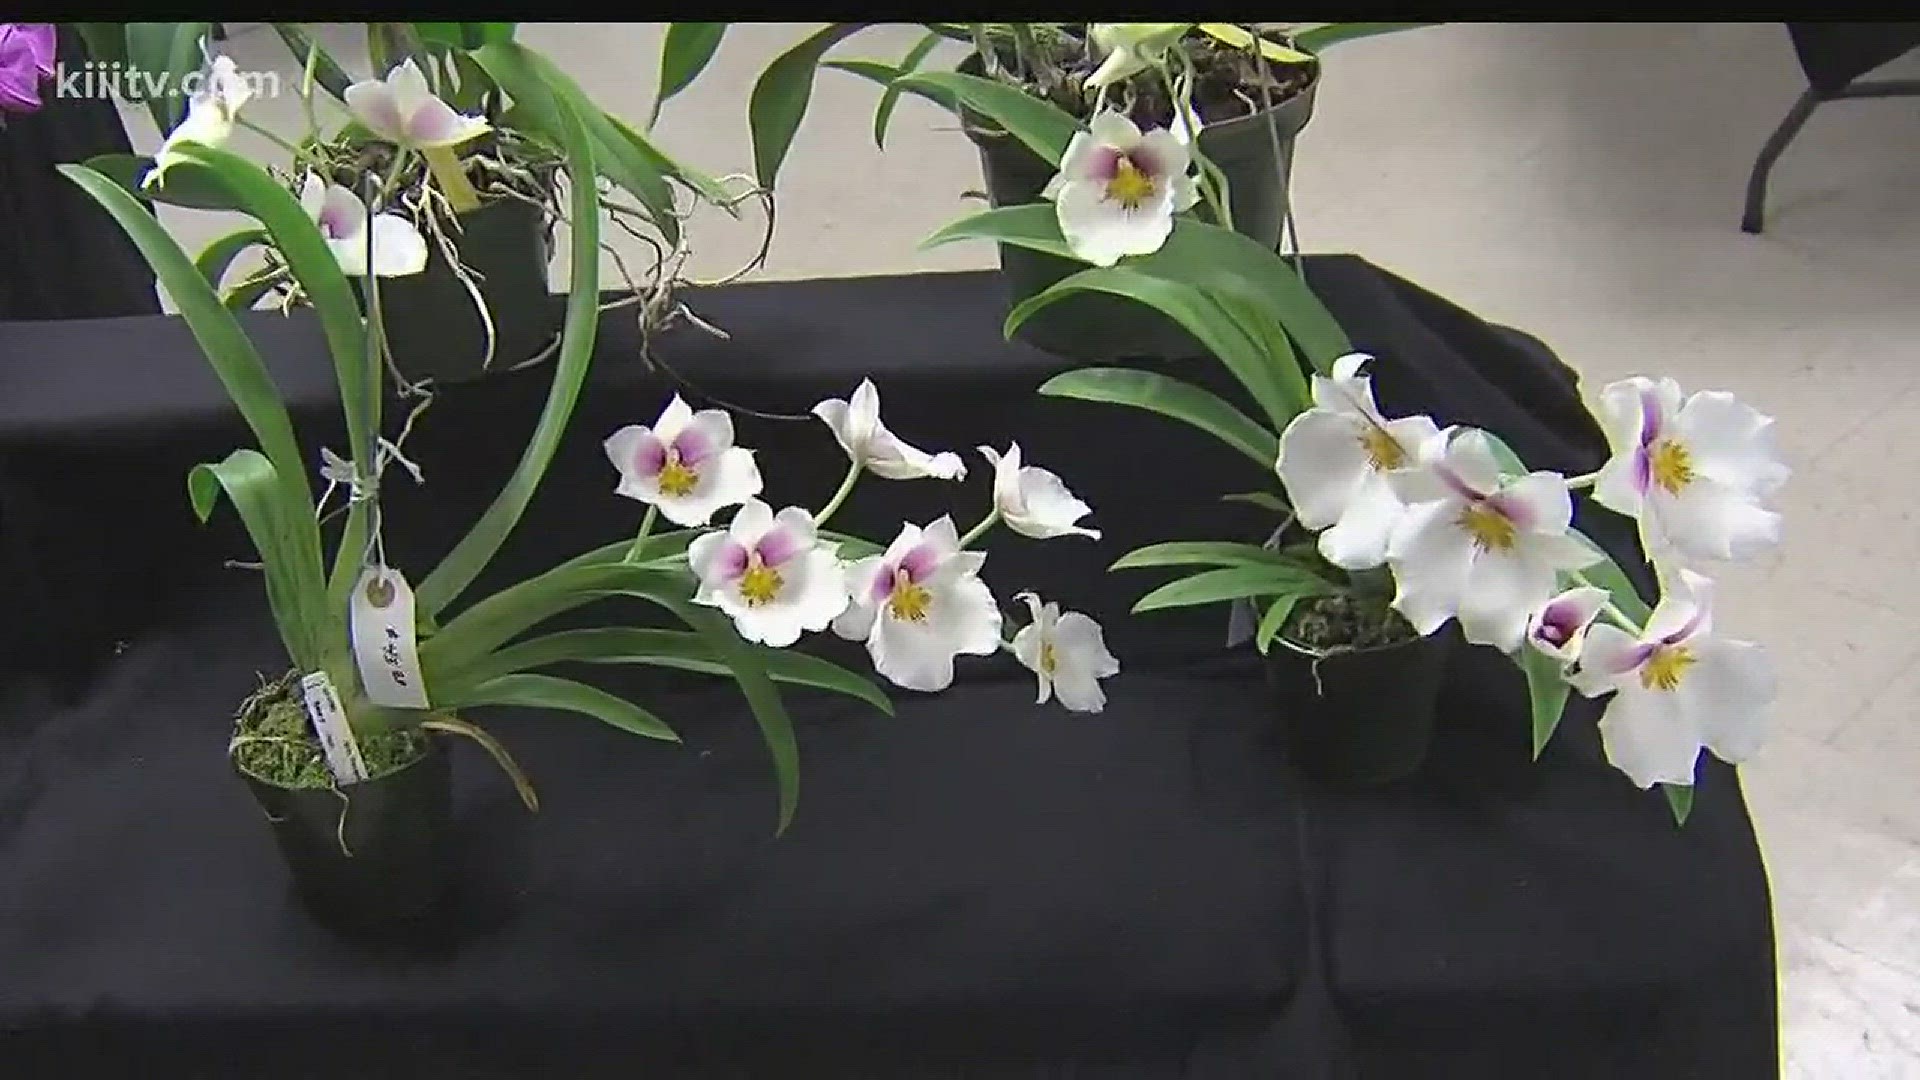 The Corpus Christi Rose Society and top Coastal Bend orchid growers are teaming up this weekend for the Orchid & Rose Show at the South Texas Botanical Gardens.